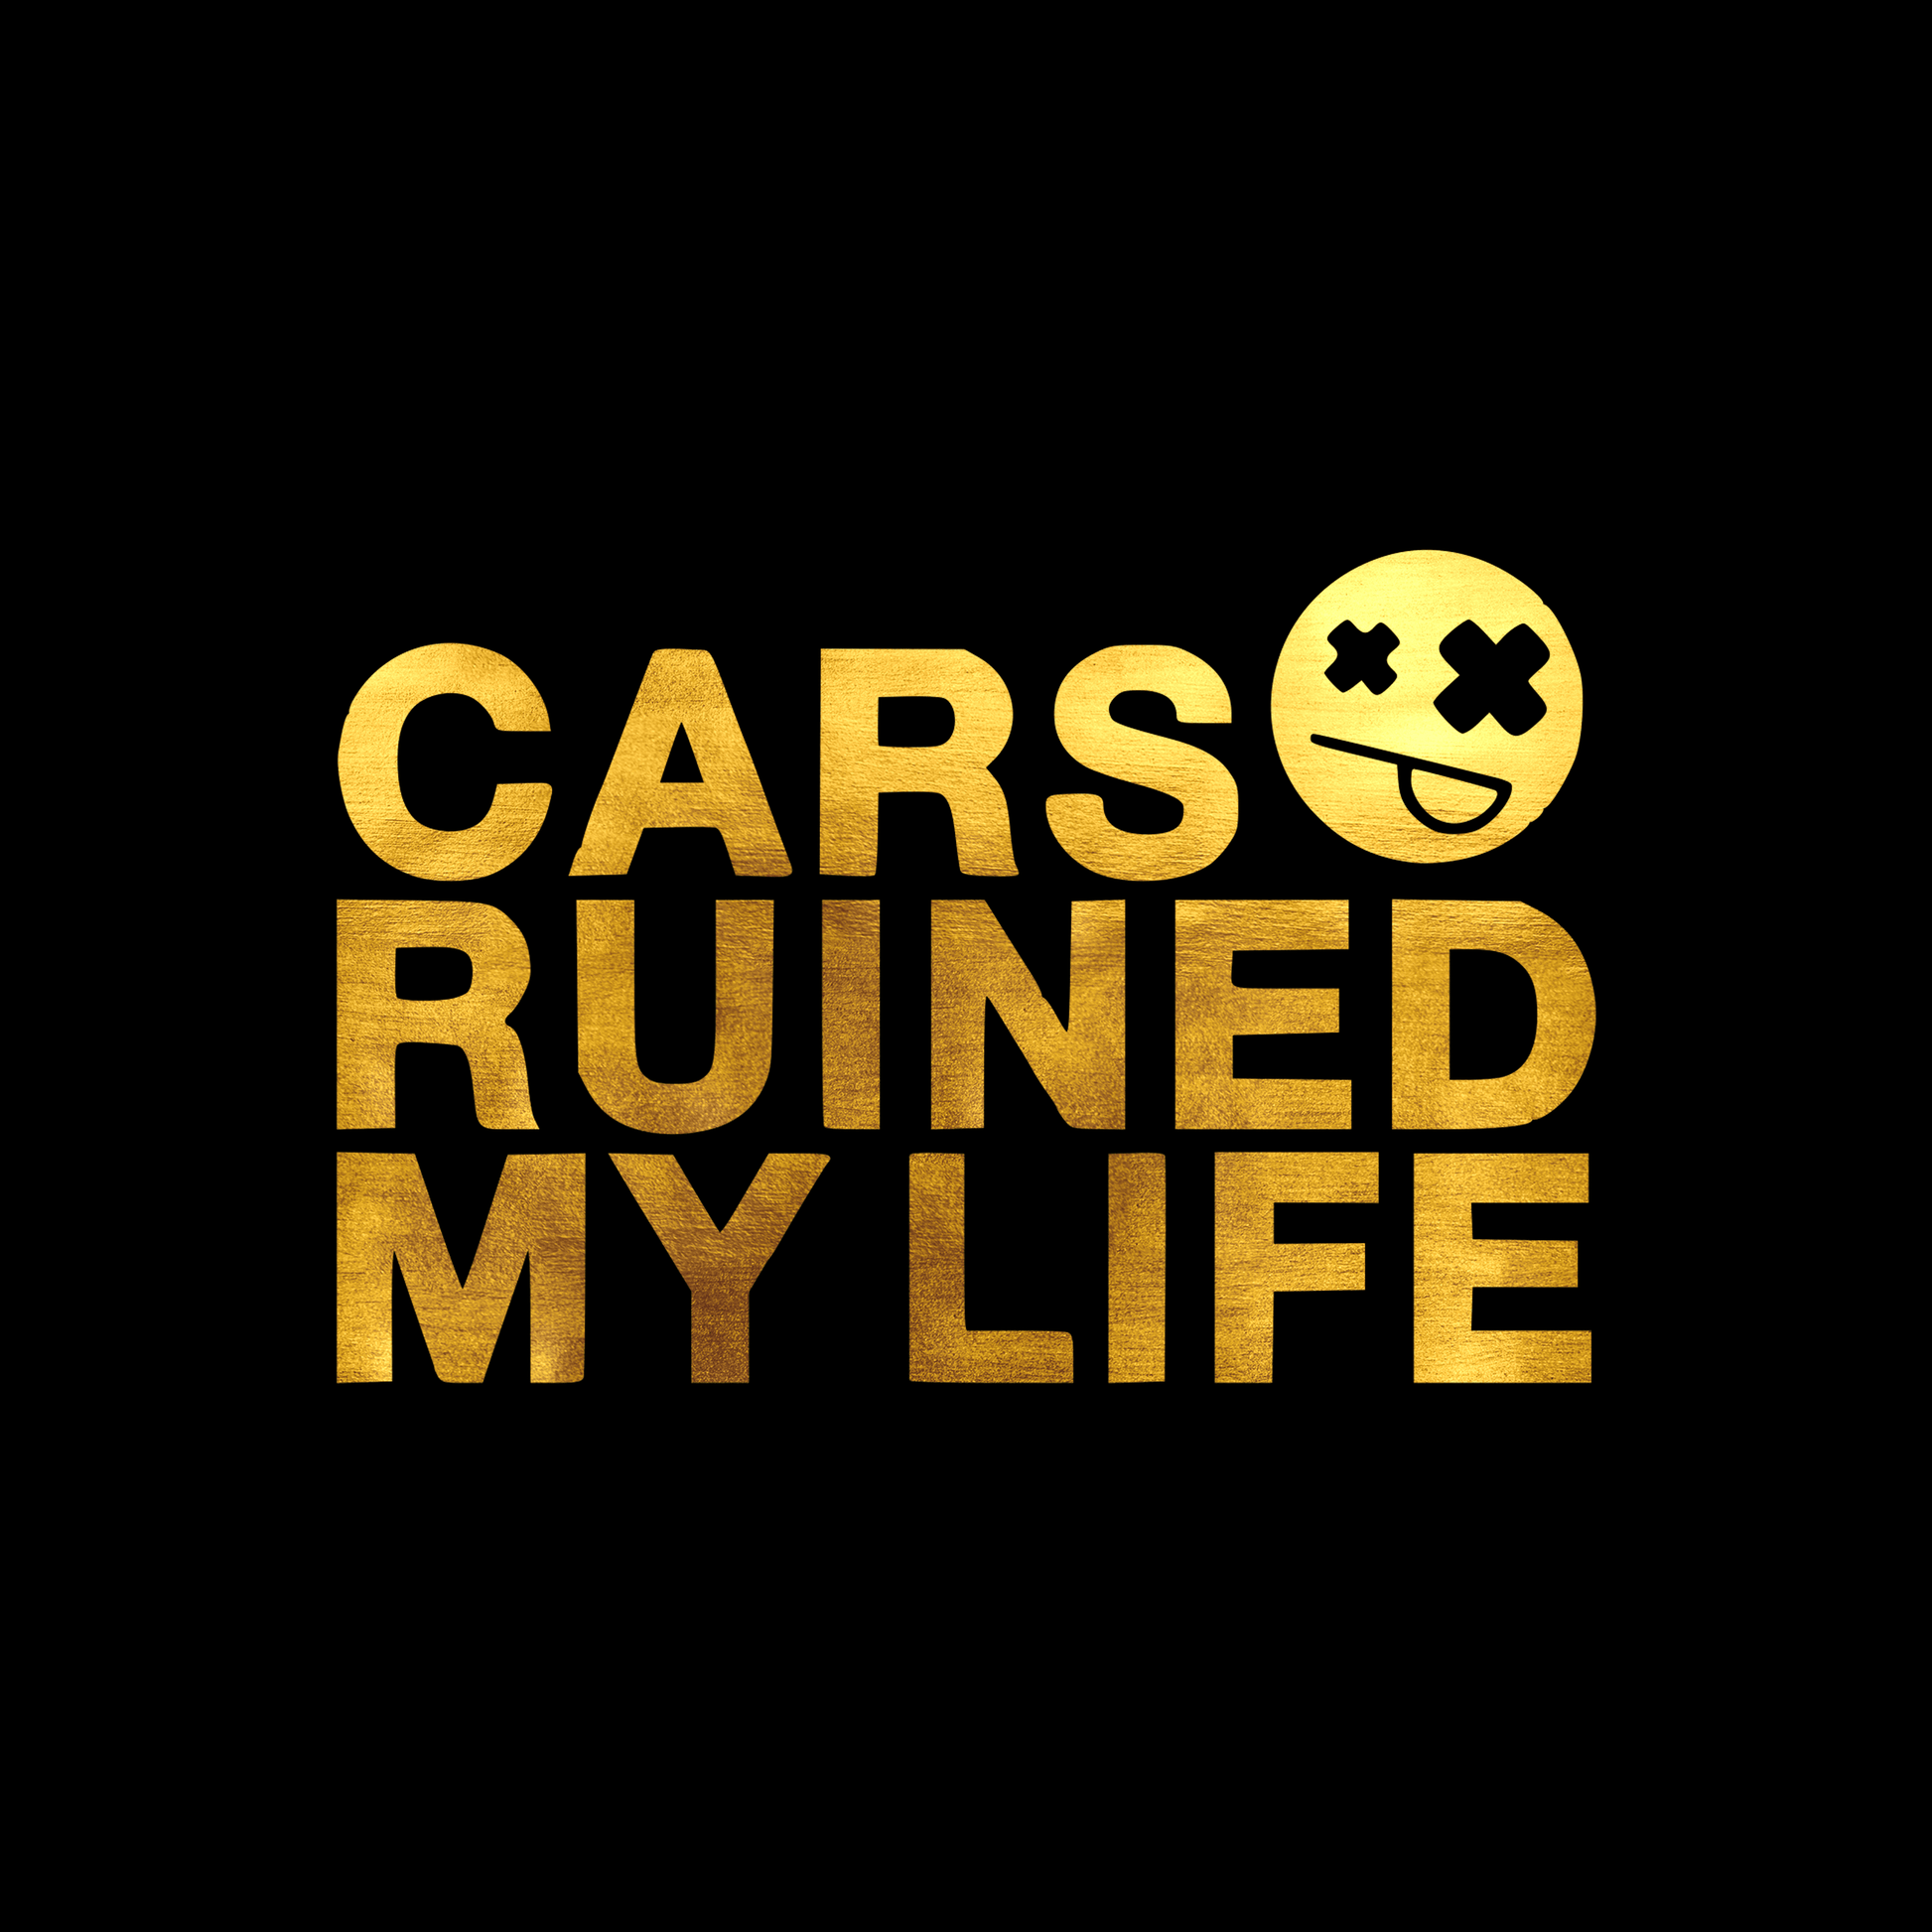  Cars ruined my life sticker decal